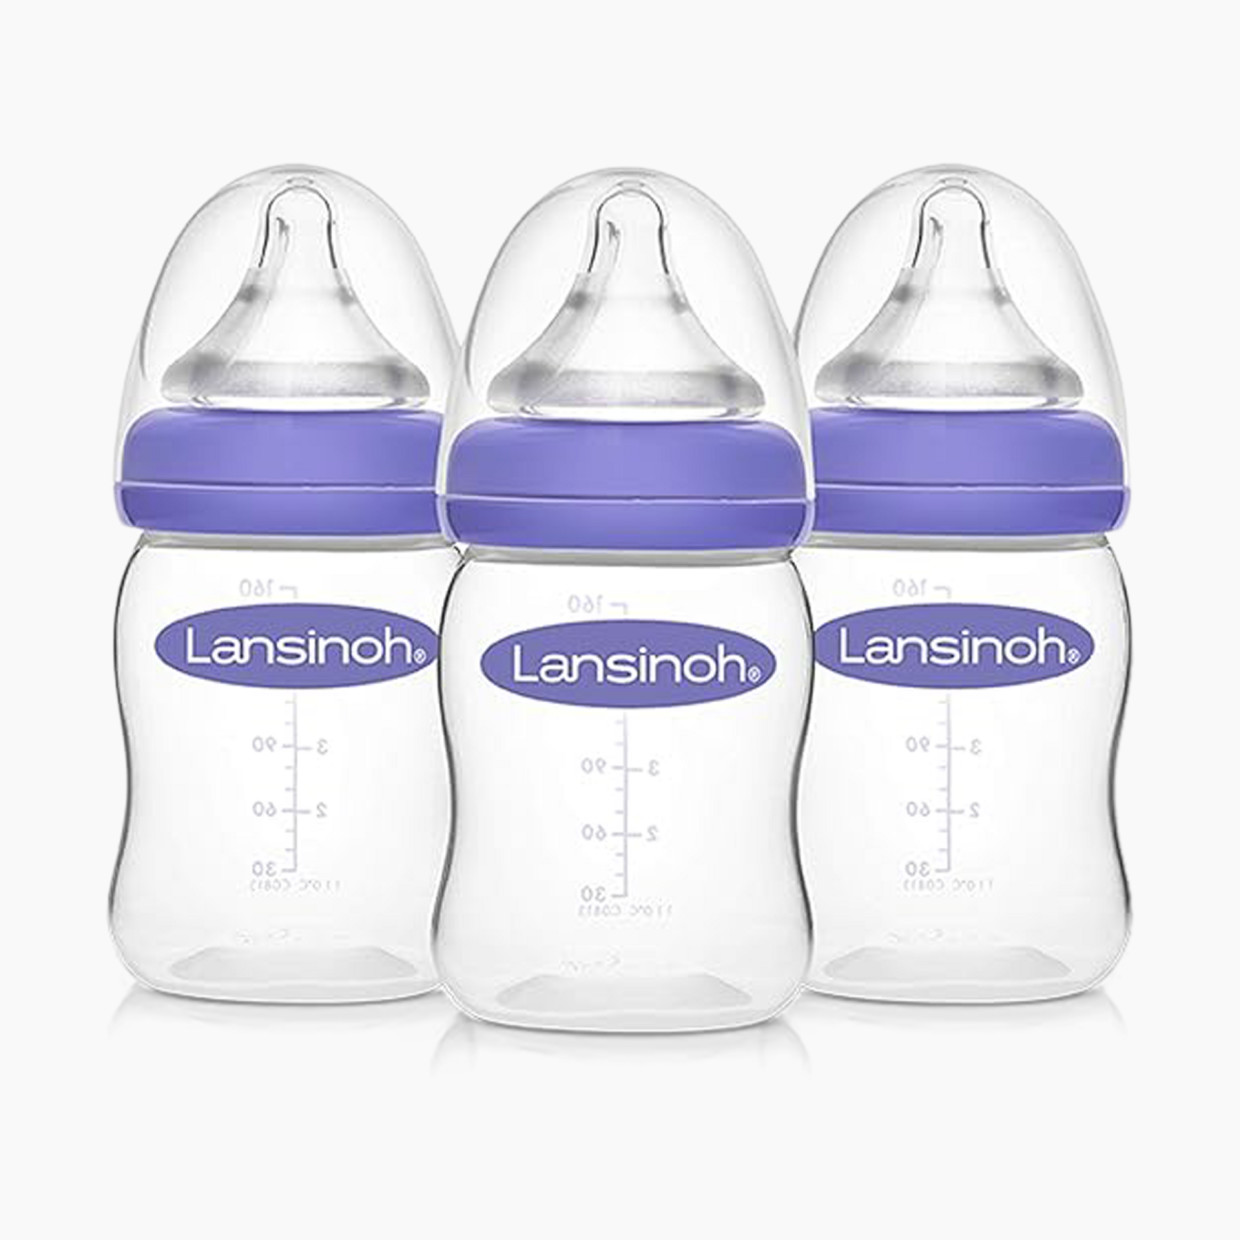 5 Things to Know About Your Baby's Bottle